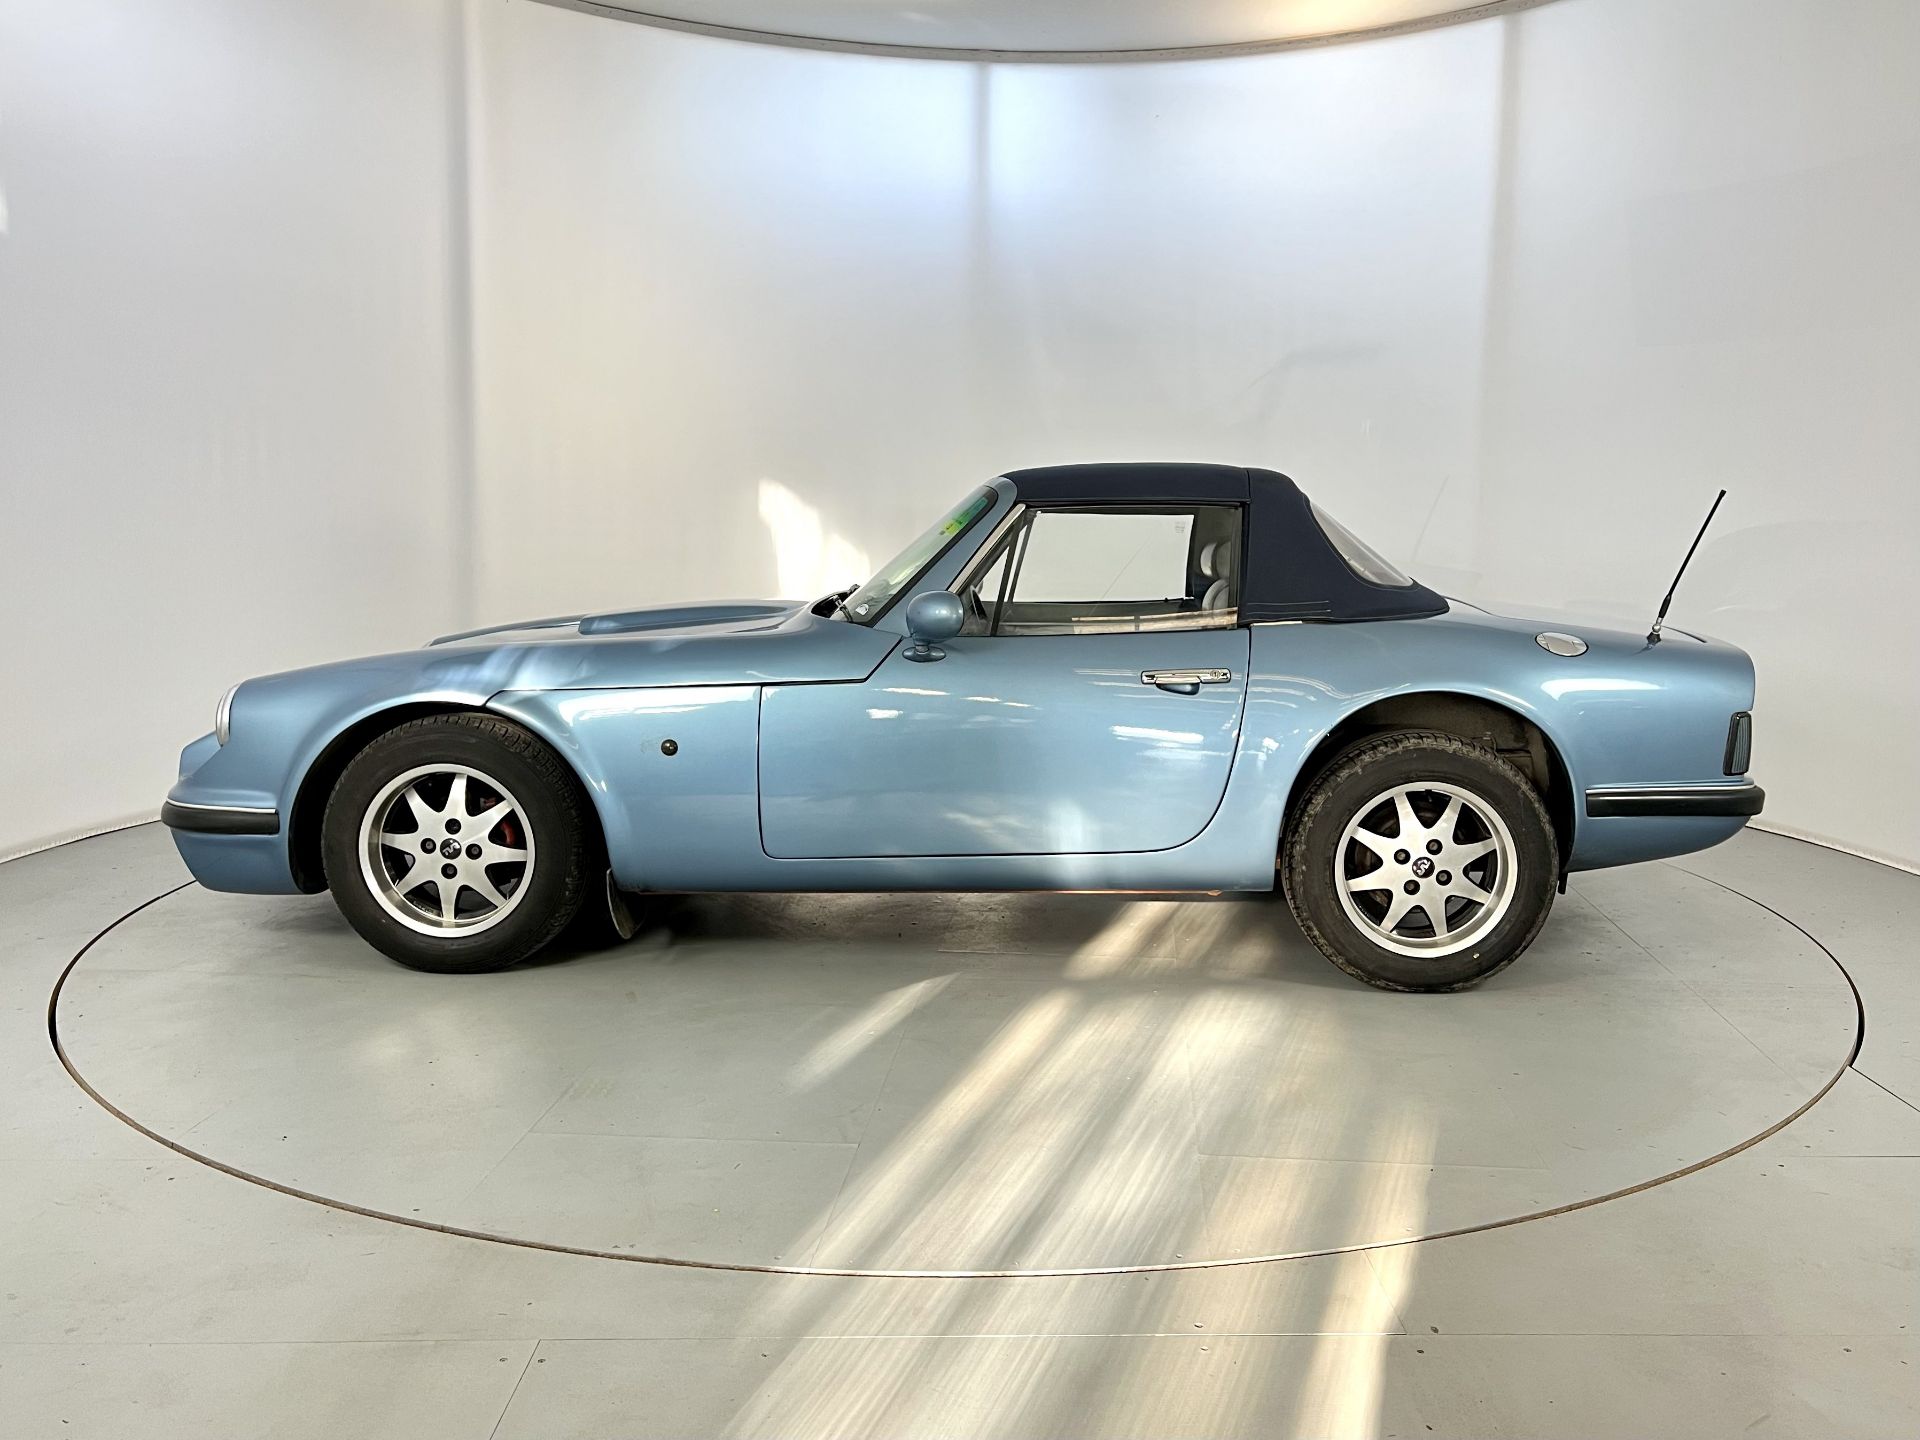 TVR S2 - Image 5 of 29